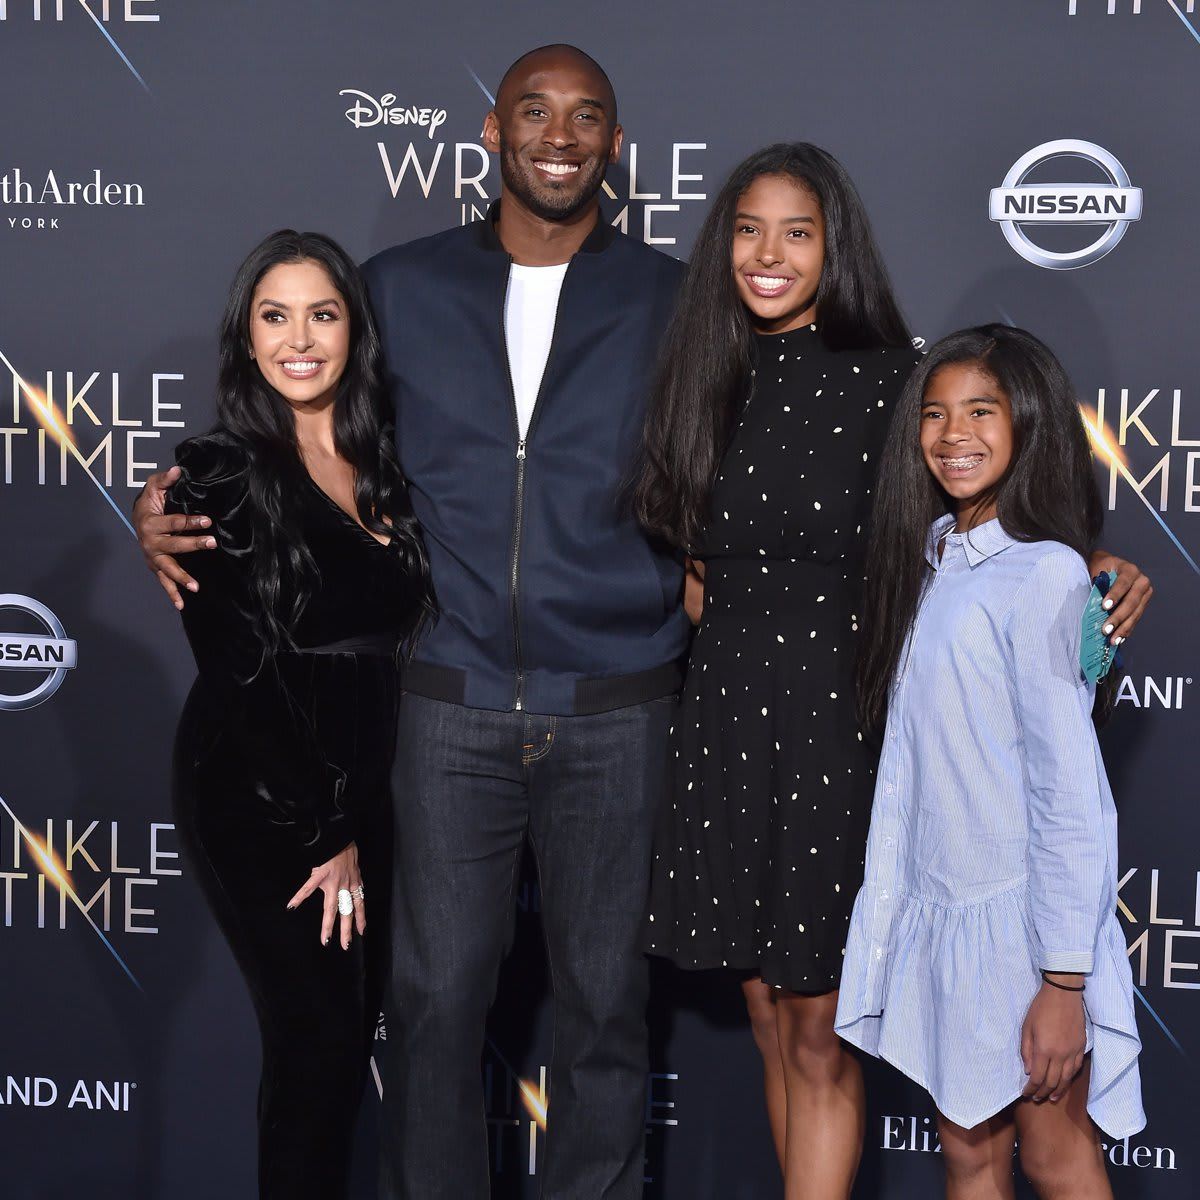 Premiere Of Disney's "A Wrinkle In Time"   Arrivals